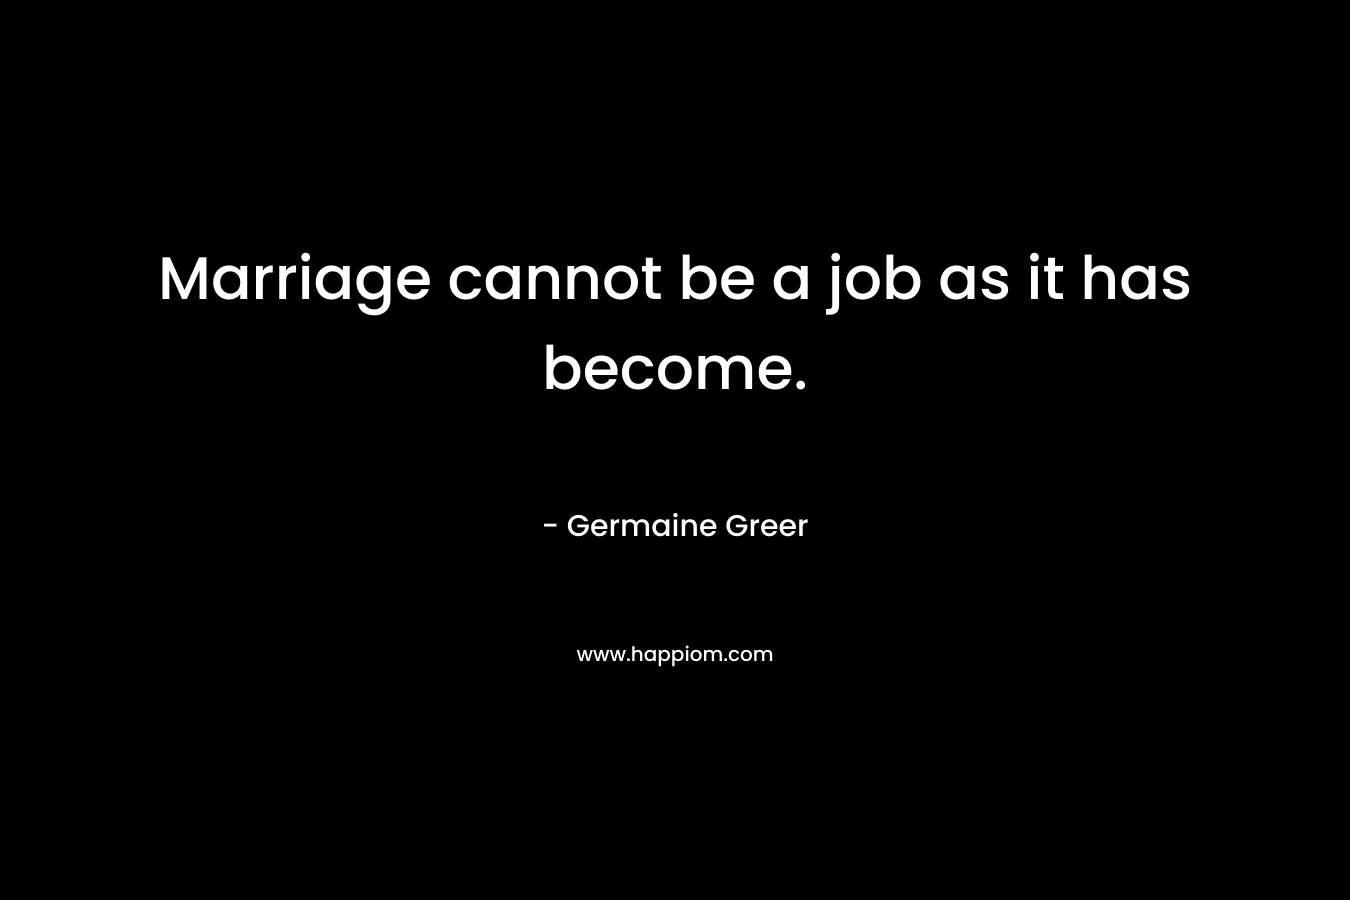 Marriage cannot be a job as it has become.